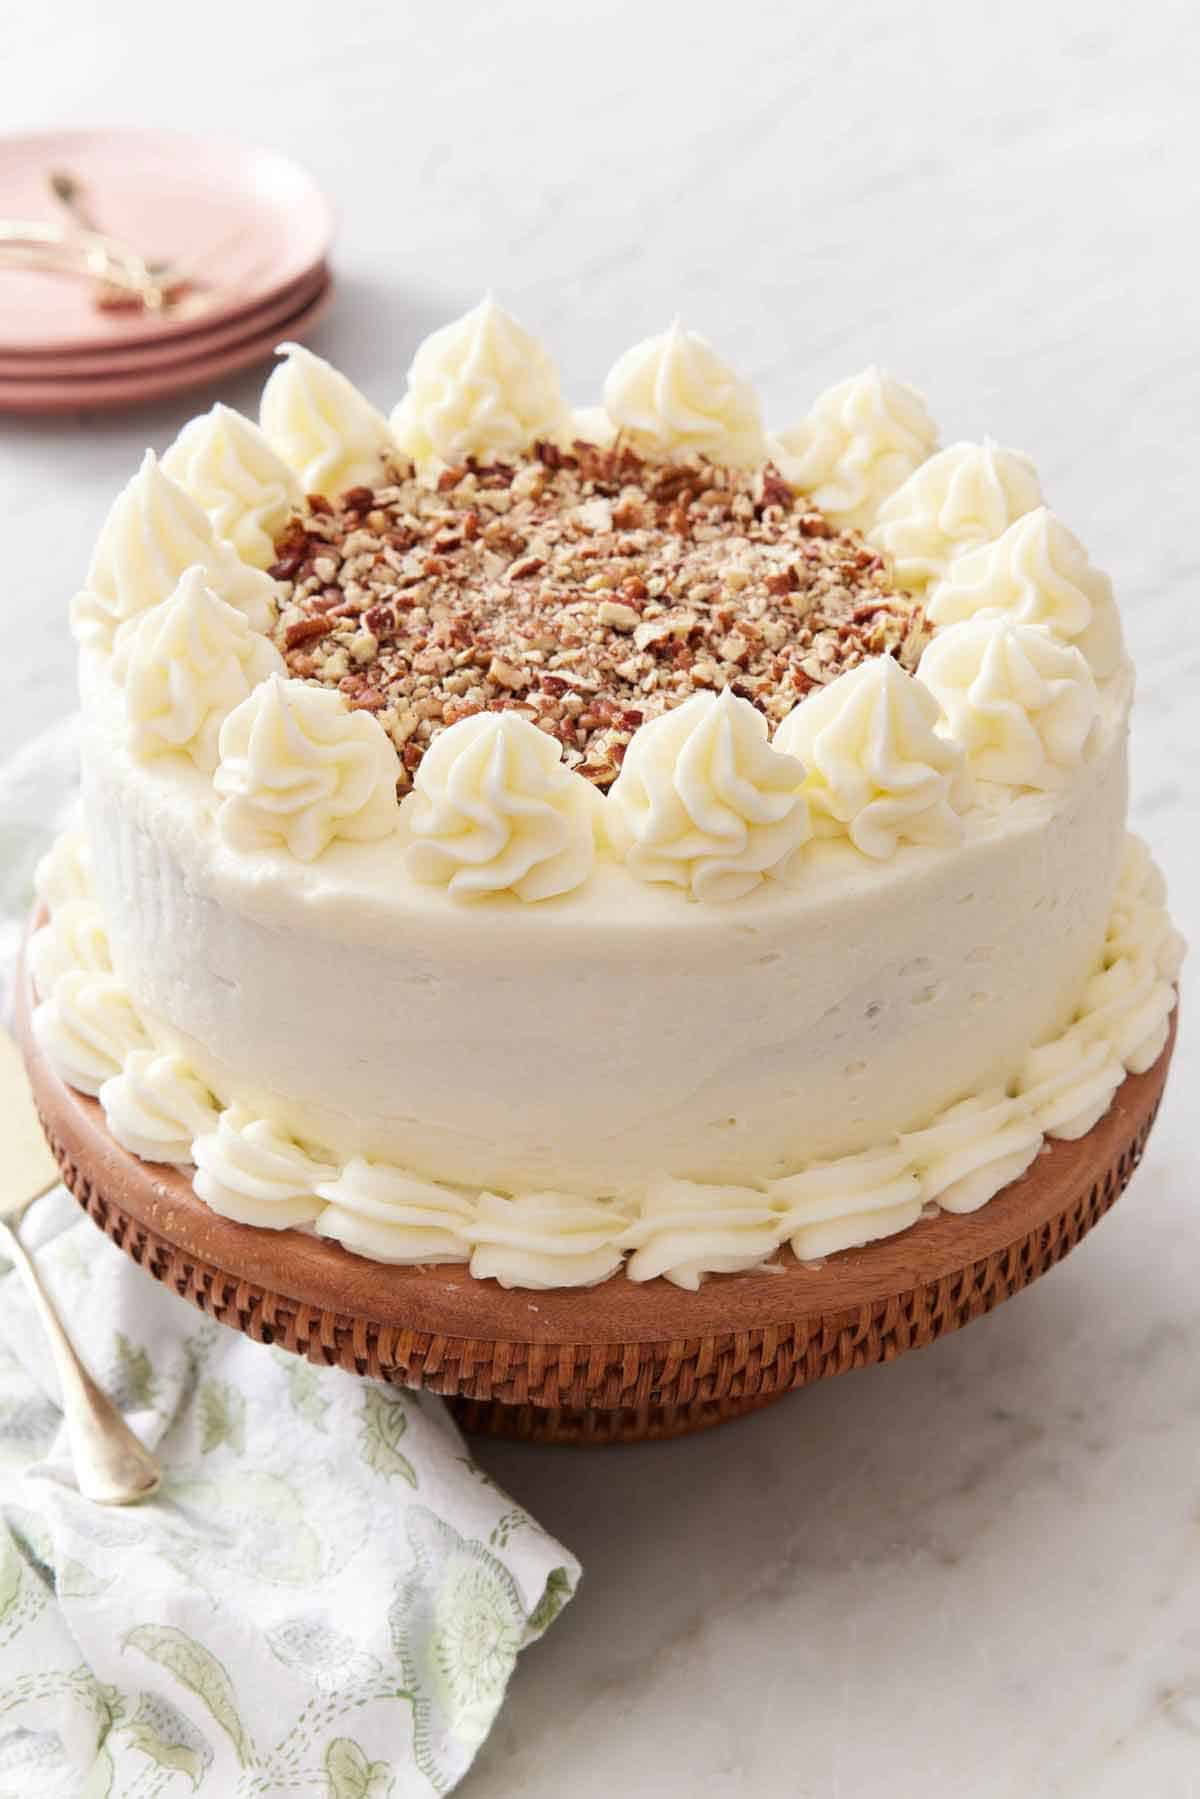 A carrot cake coated in frosting and topped with chopped pecans on a cake stand.